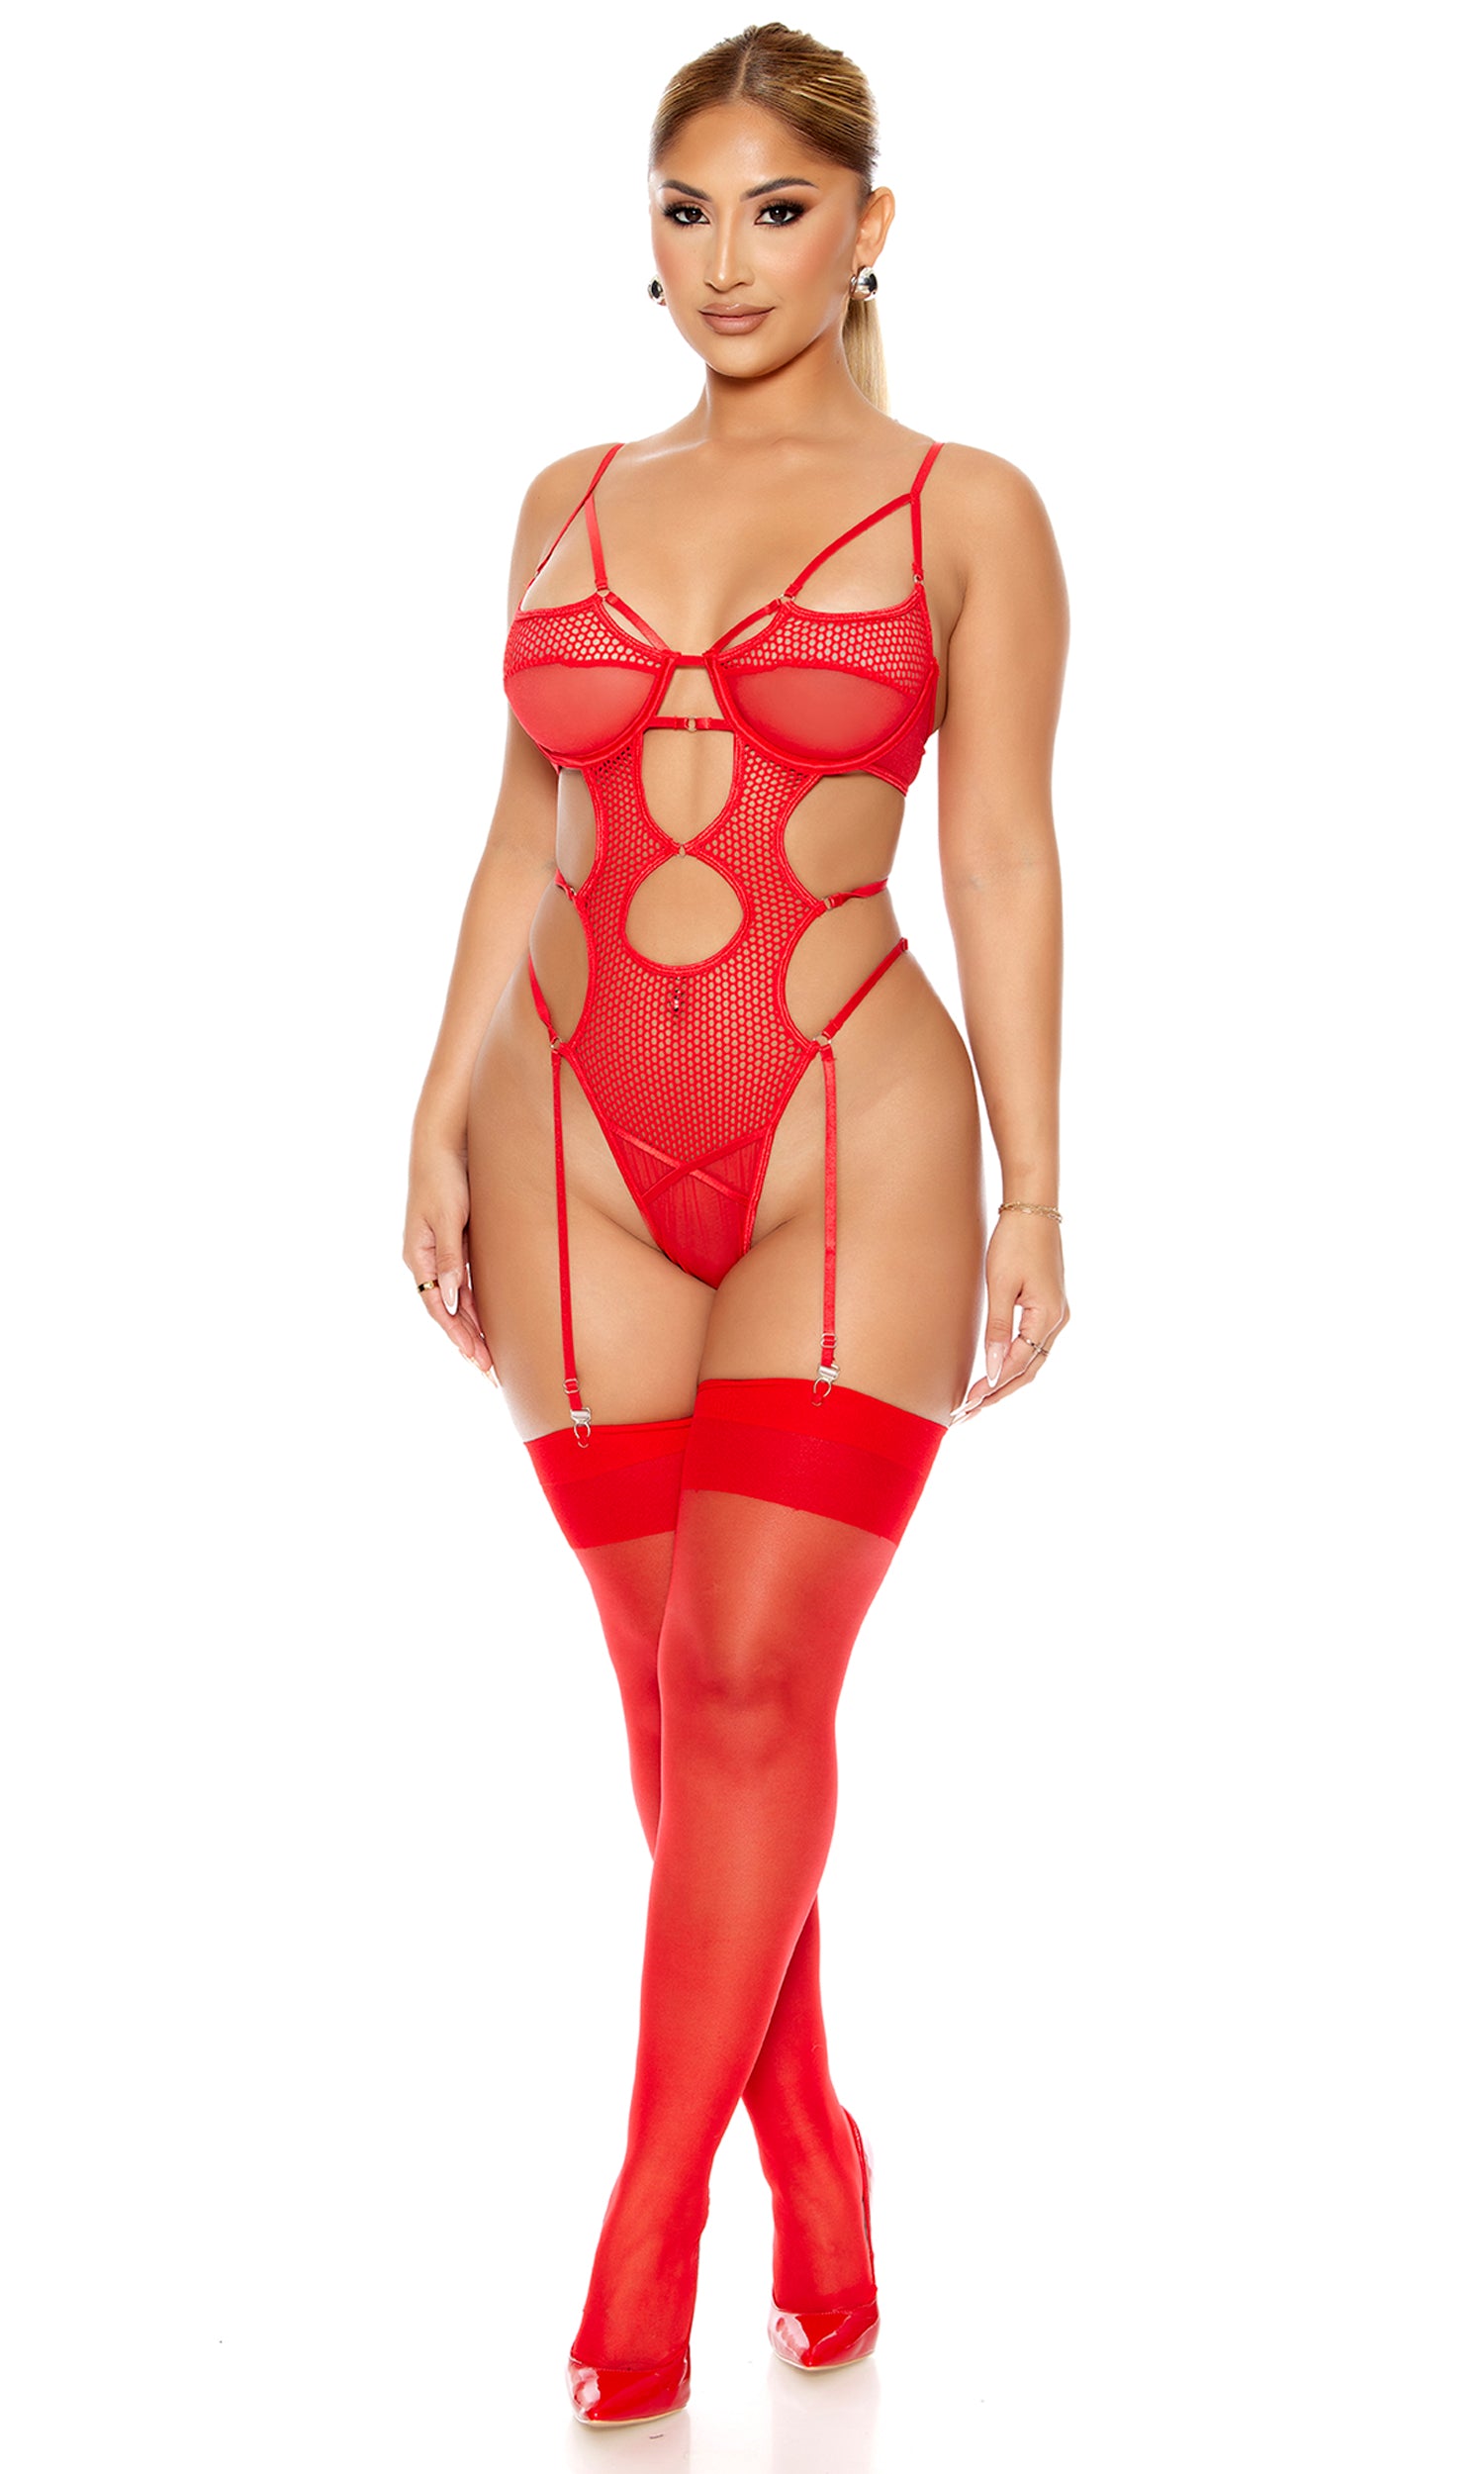 Caught Up O-Net Strappy Teddy Set